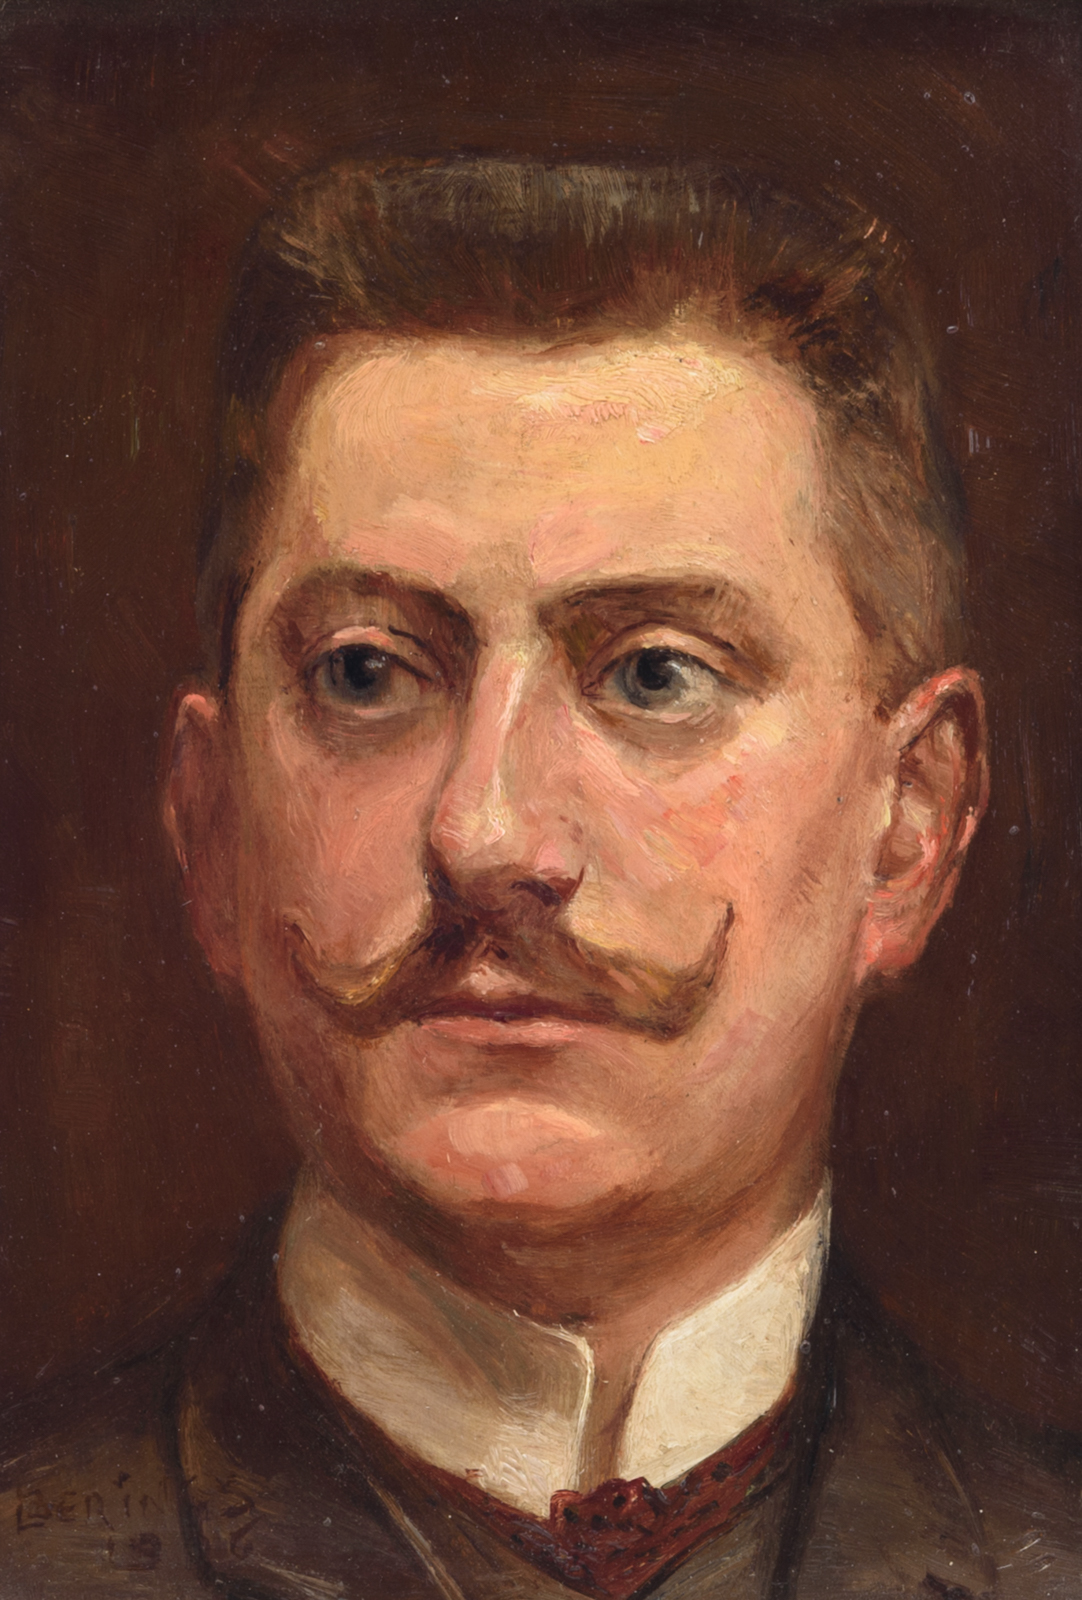 Berings L., the portrait of a man, dated 1916, oil on panel, 15 x 20,5 cm